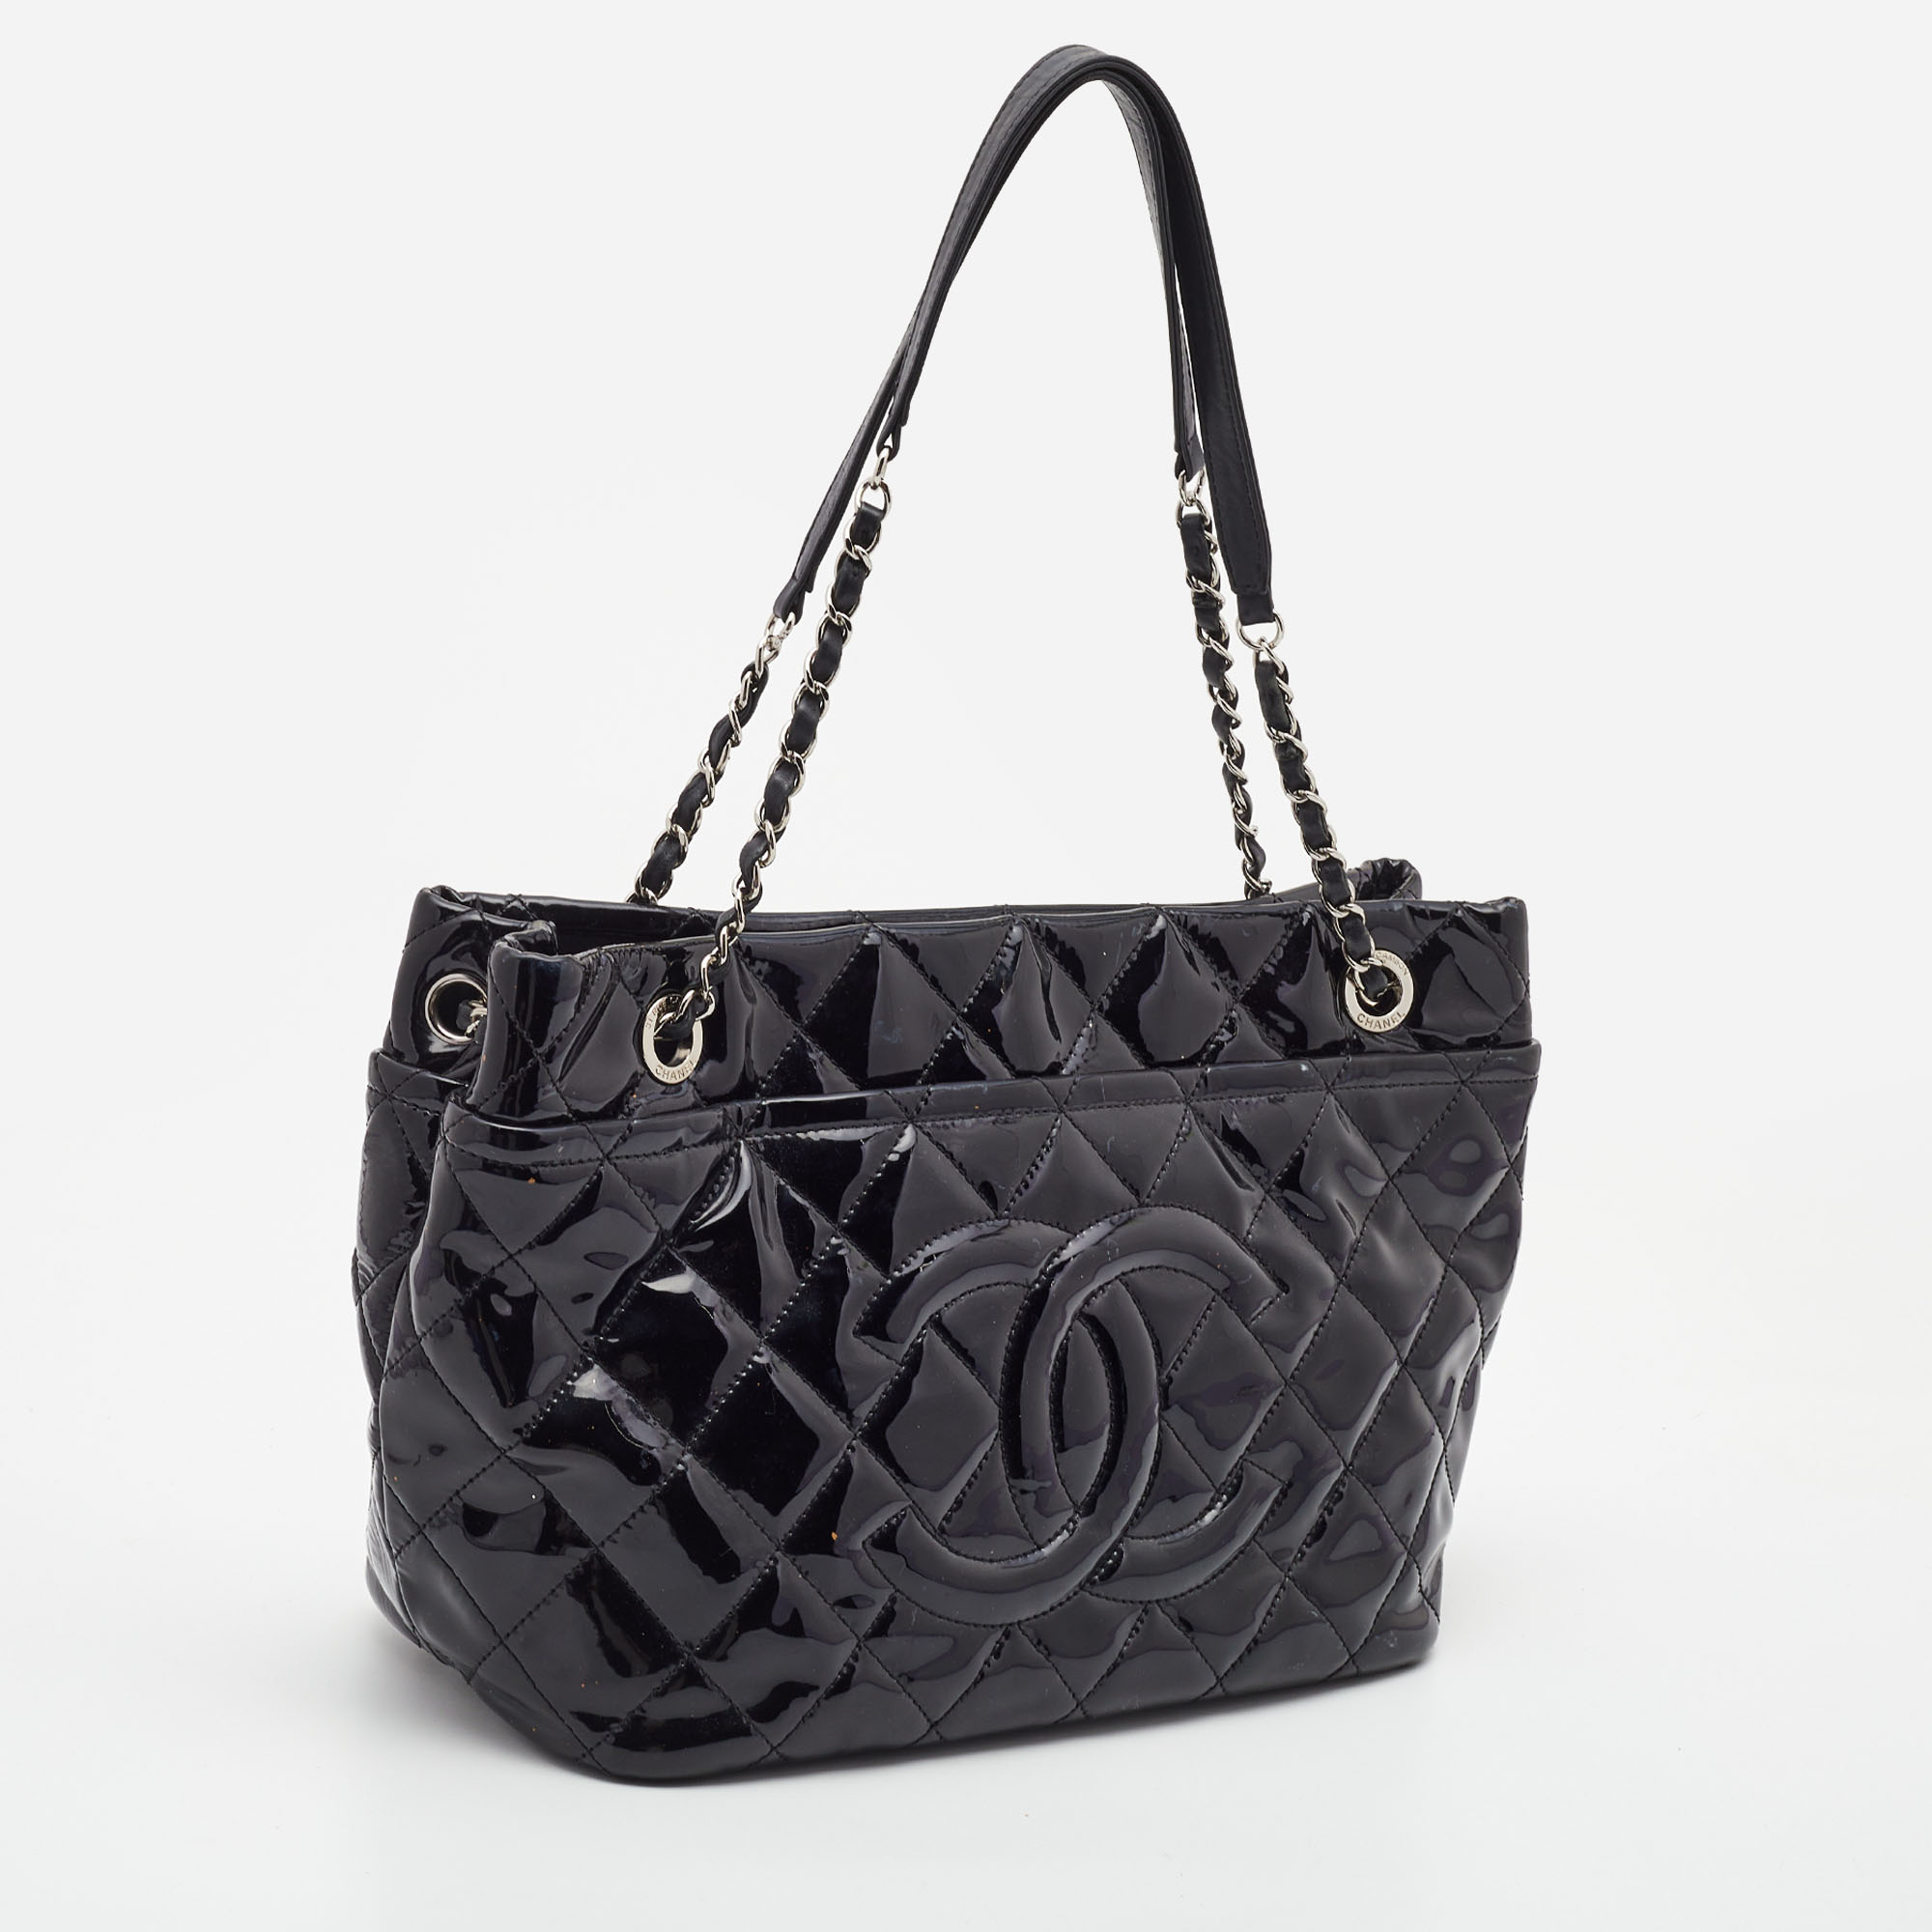 Chanel Black Quilted Patent Leather CC Timeless Tote